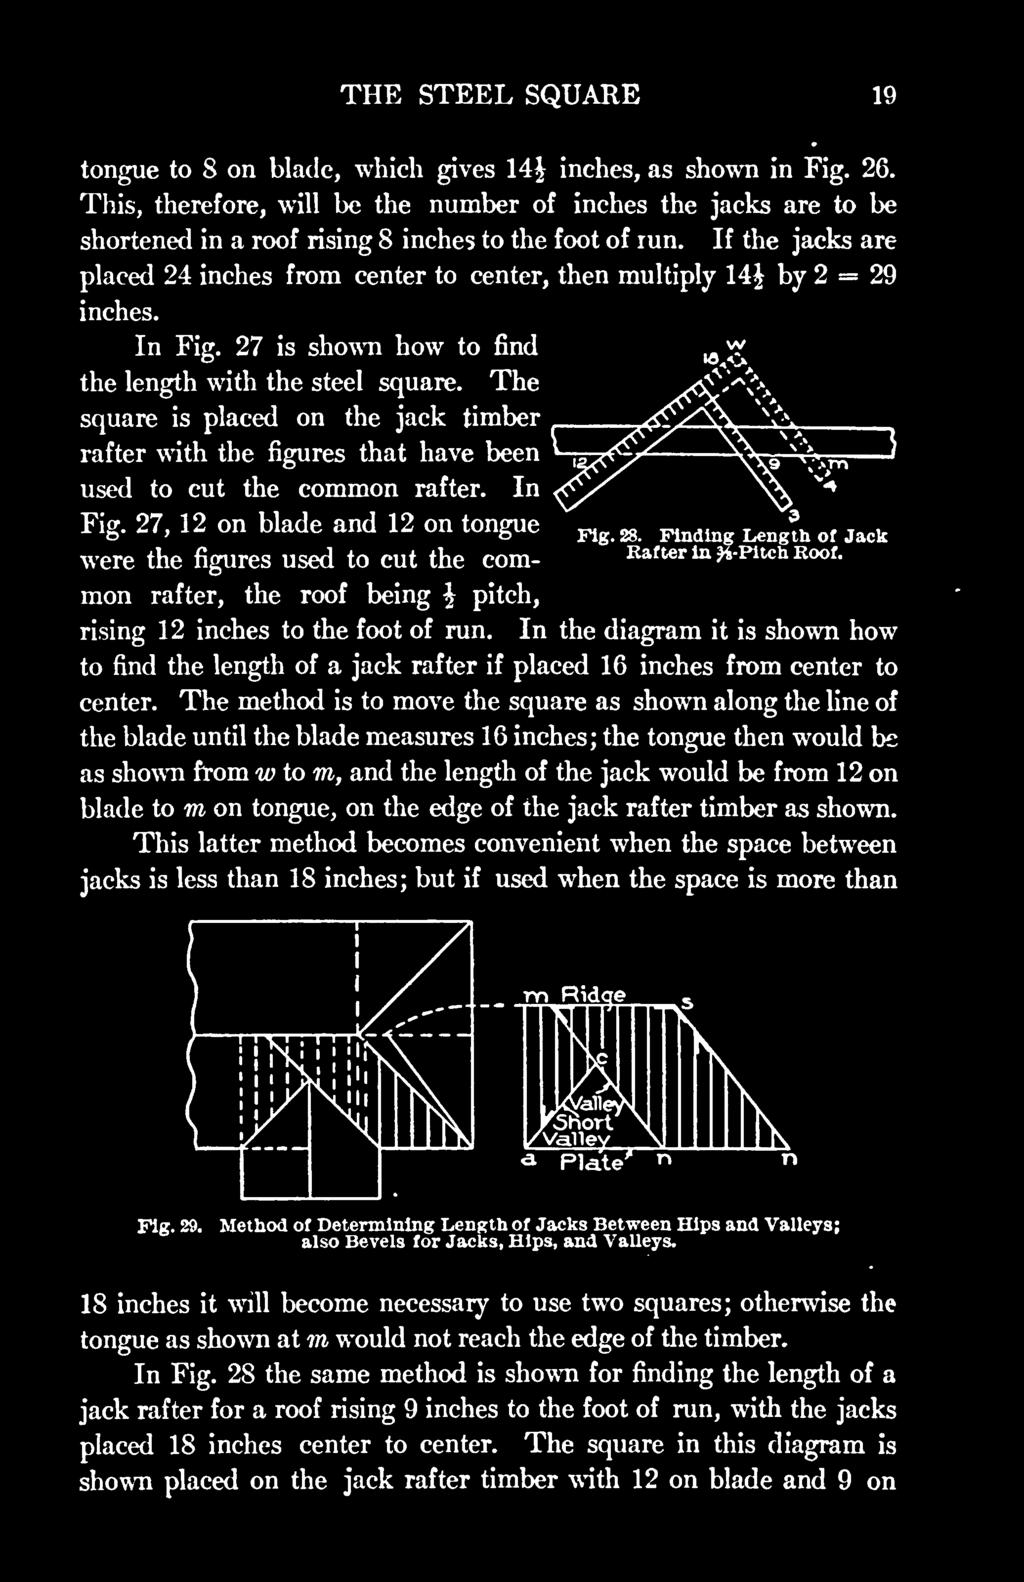 Finding Length of Jack Rafter in were the figures used to cut the common rafter, the roof being \ pitch, ^-Pitch Roof. rising 12 inches to the foot of run.